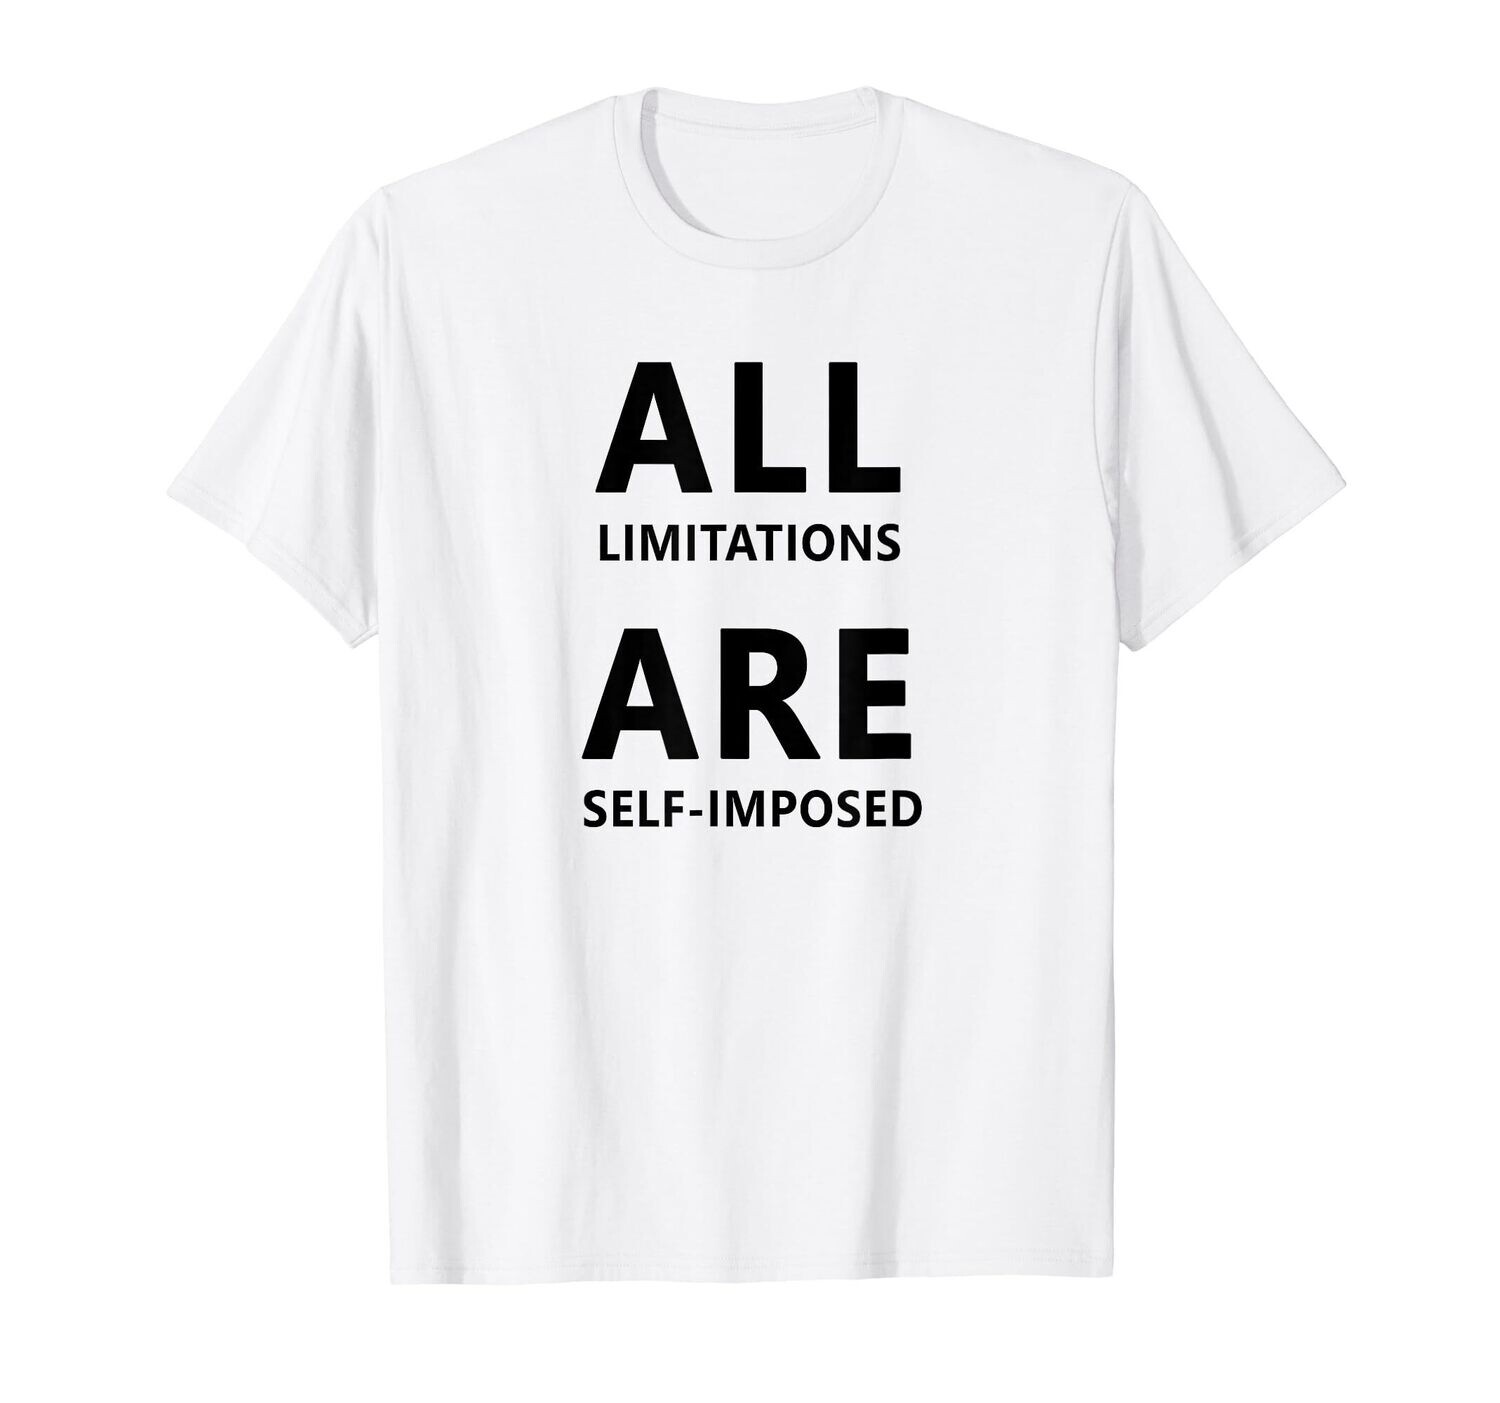 All limitations are self imposed tees